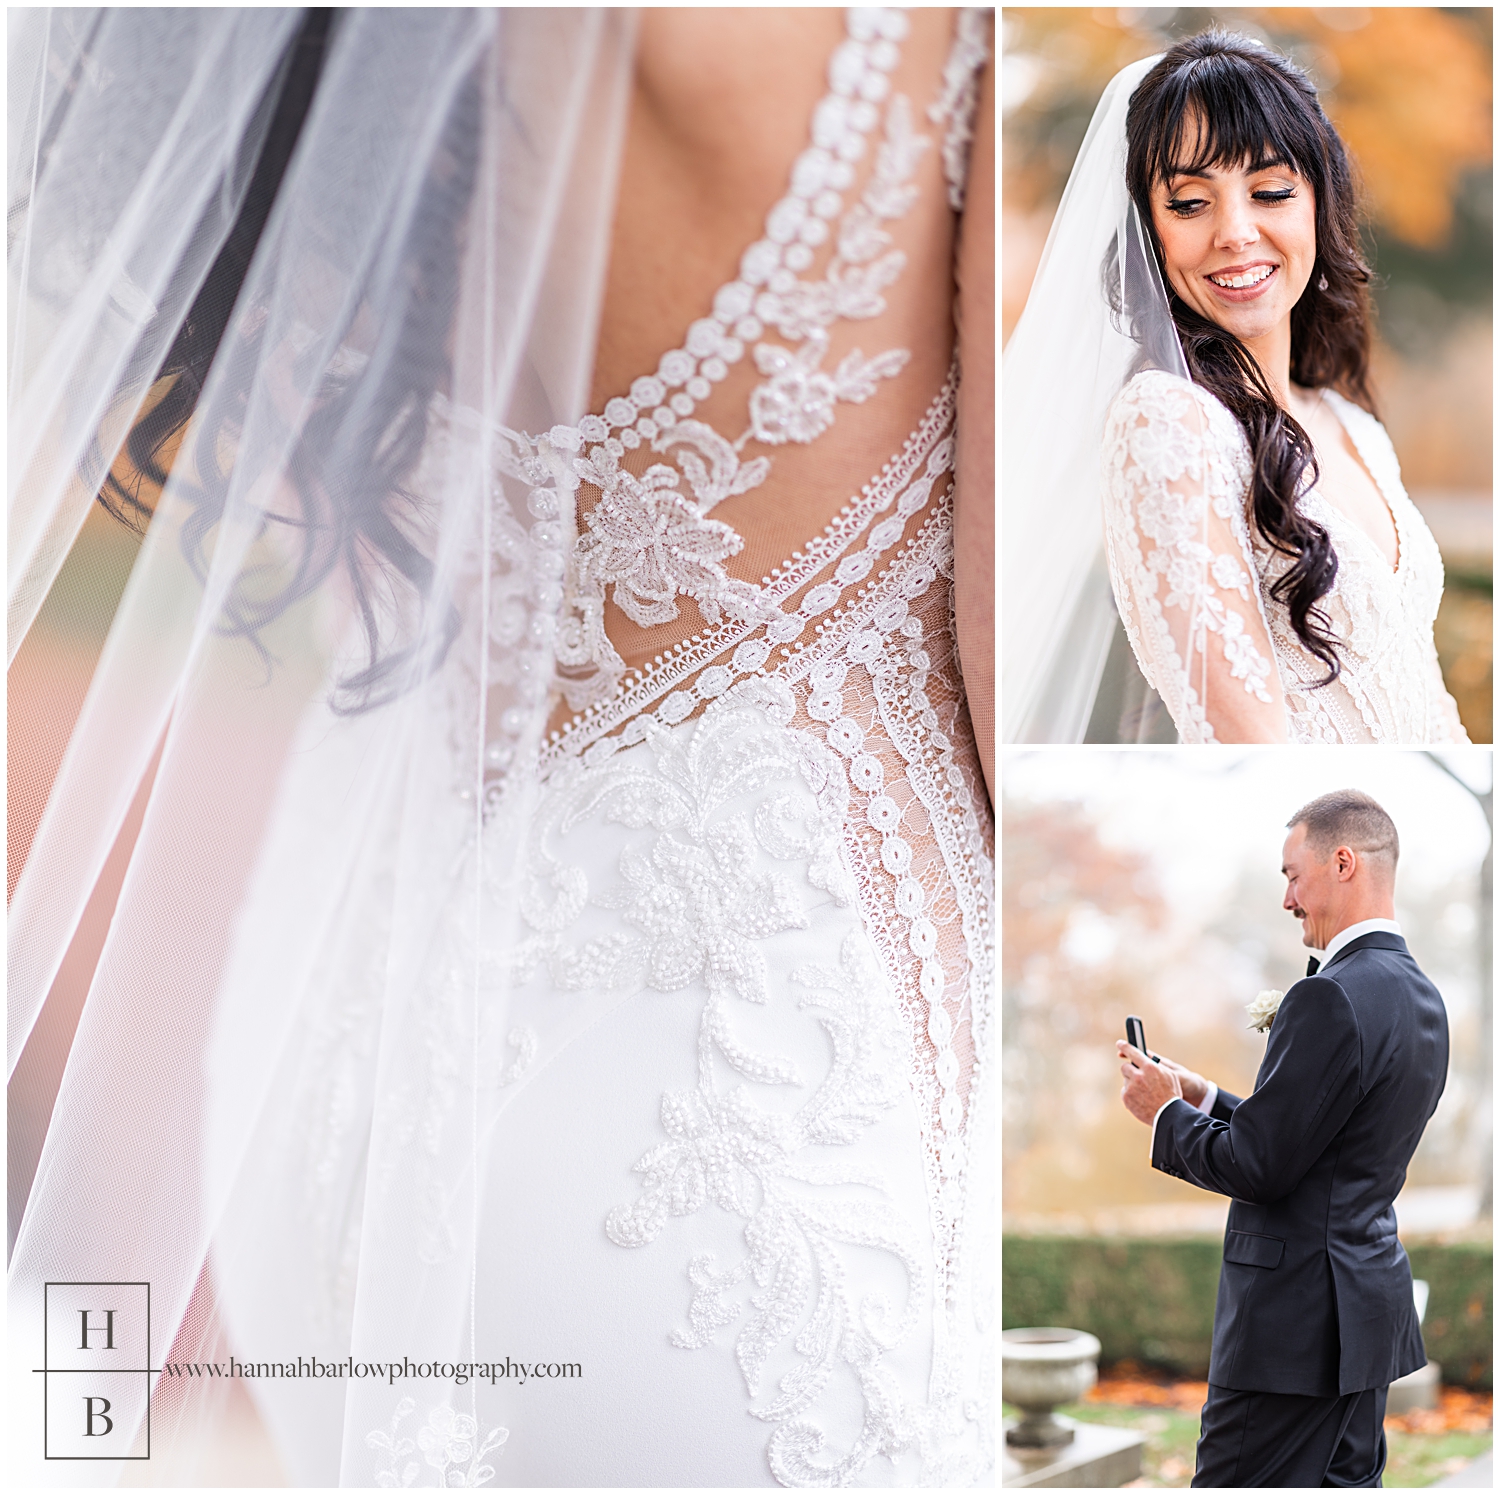 Bridal gown details are featured